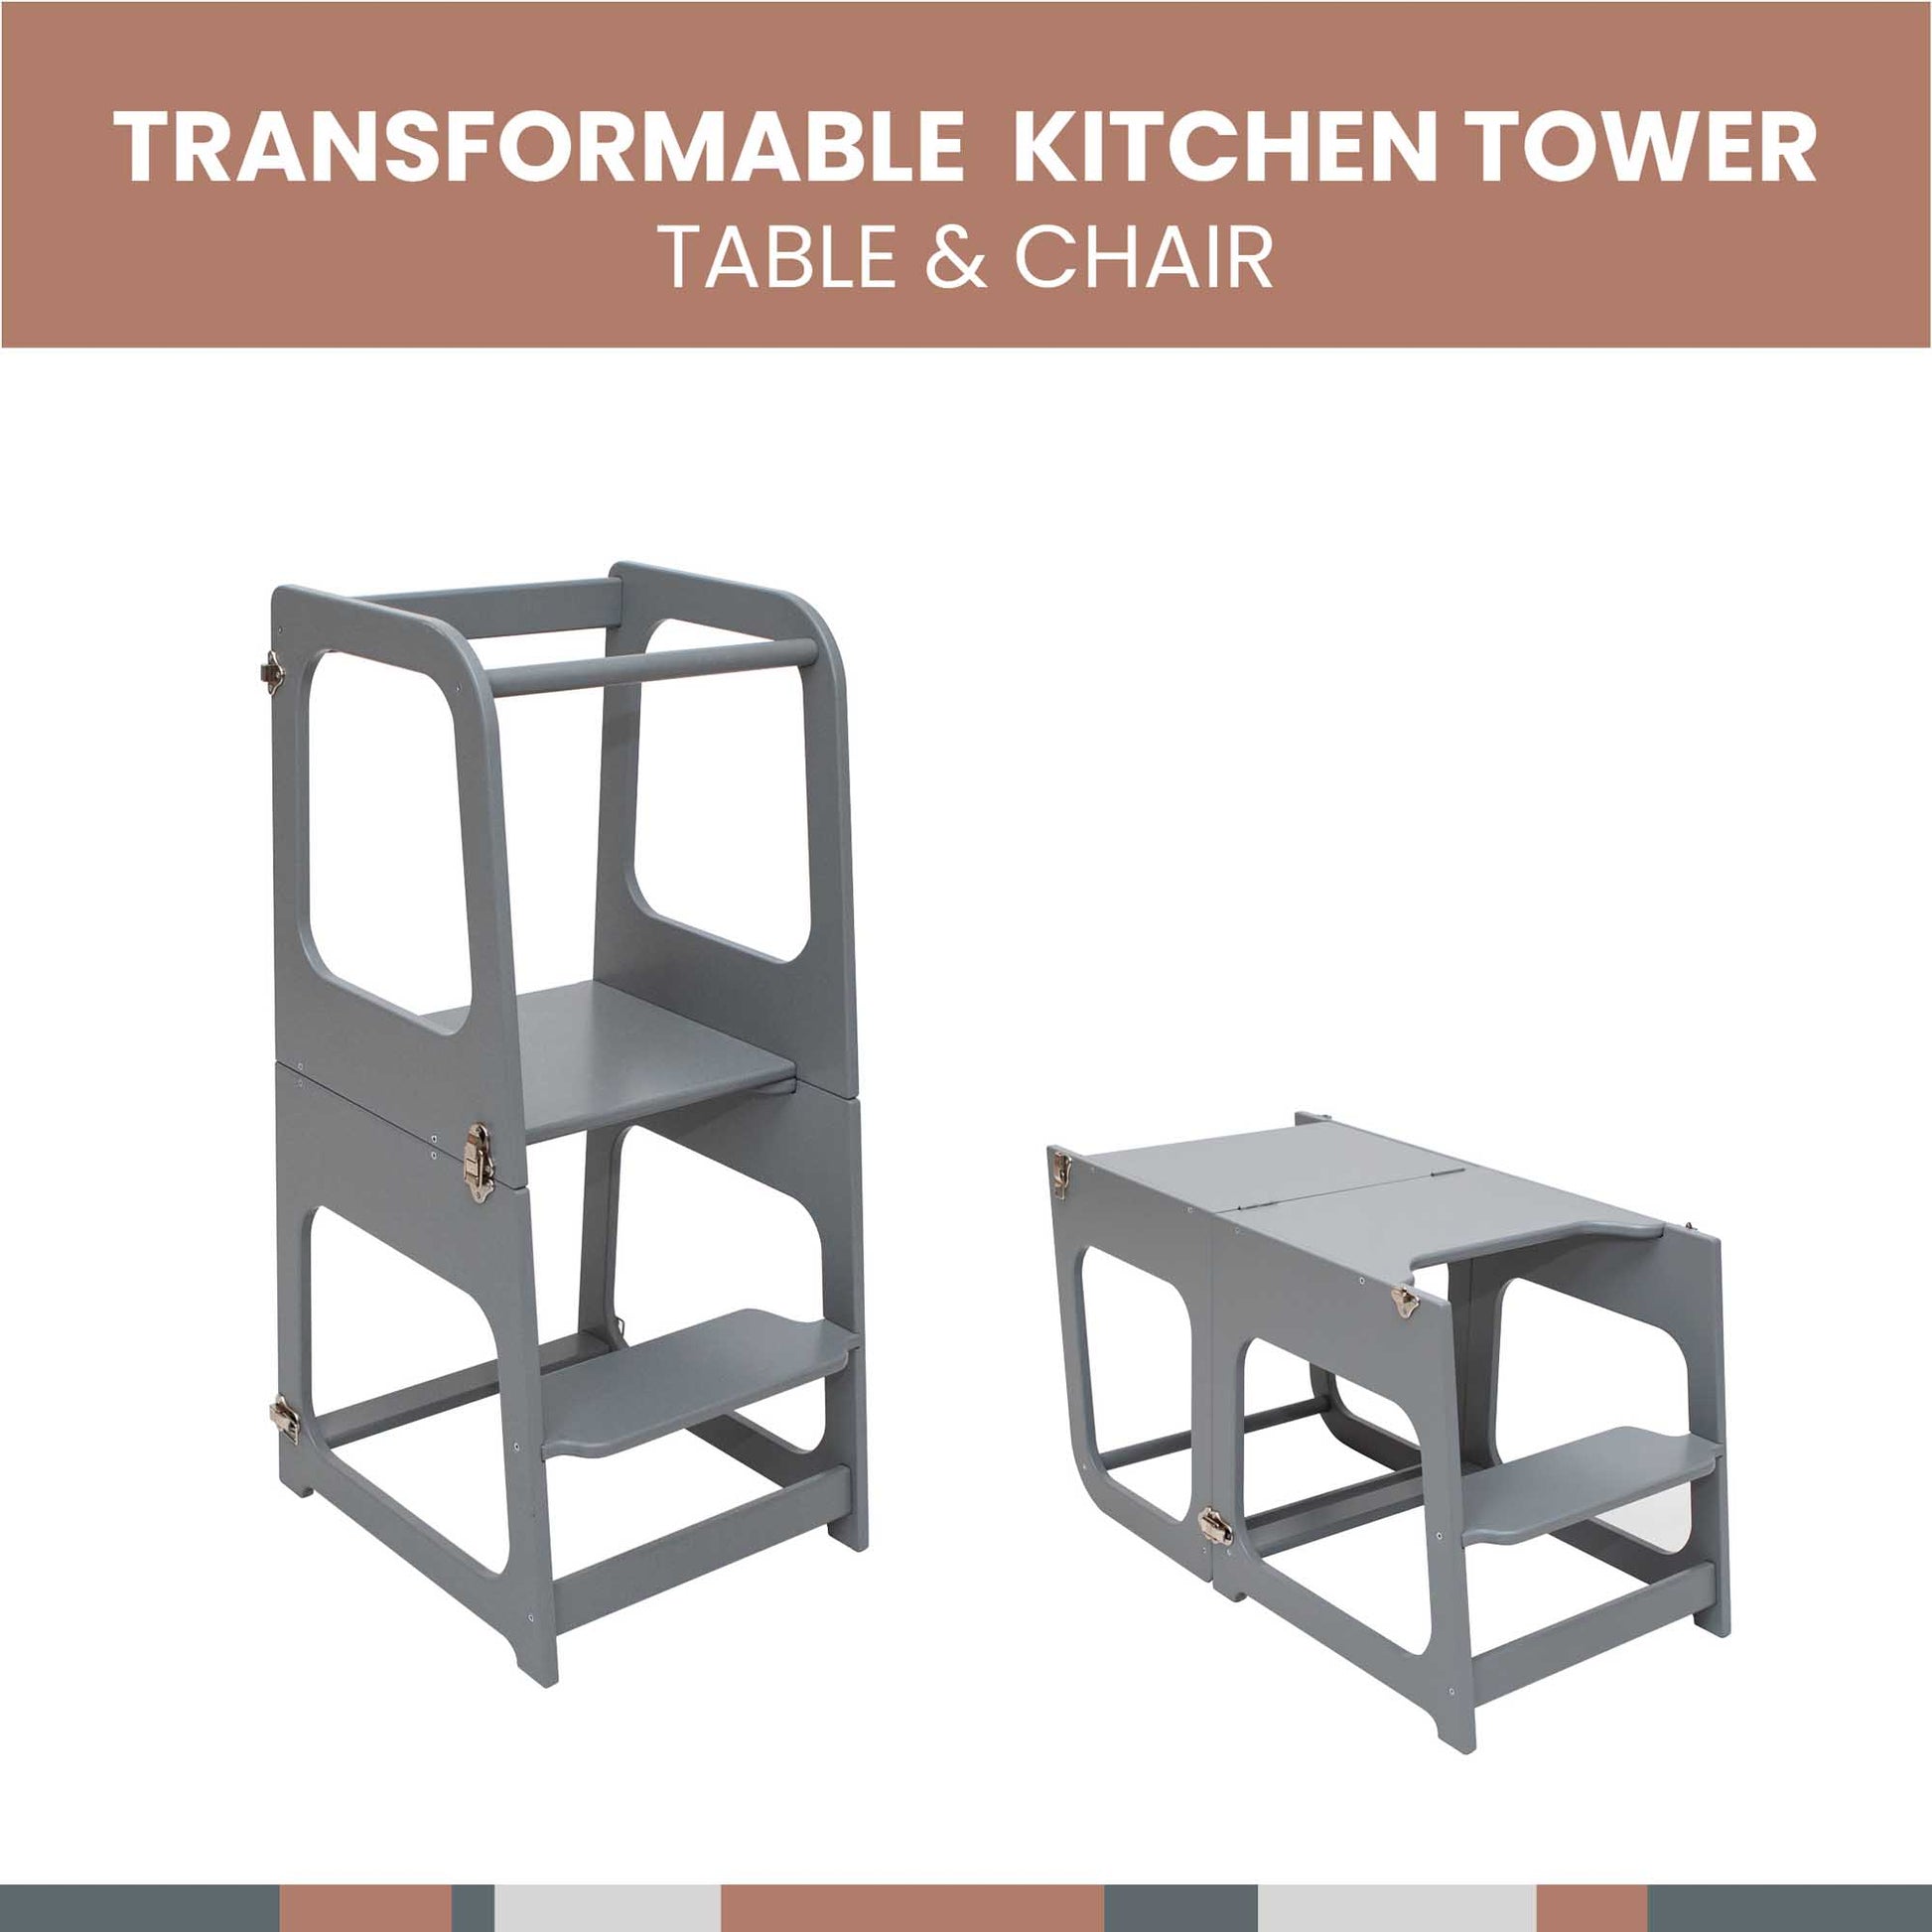 Transformable 2-in-1 kitchen tower - table and chair from Sweet Home From Wood.